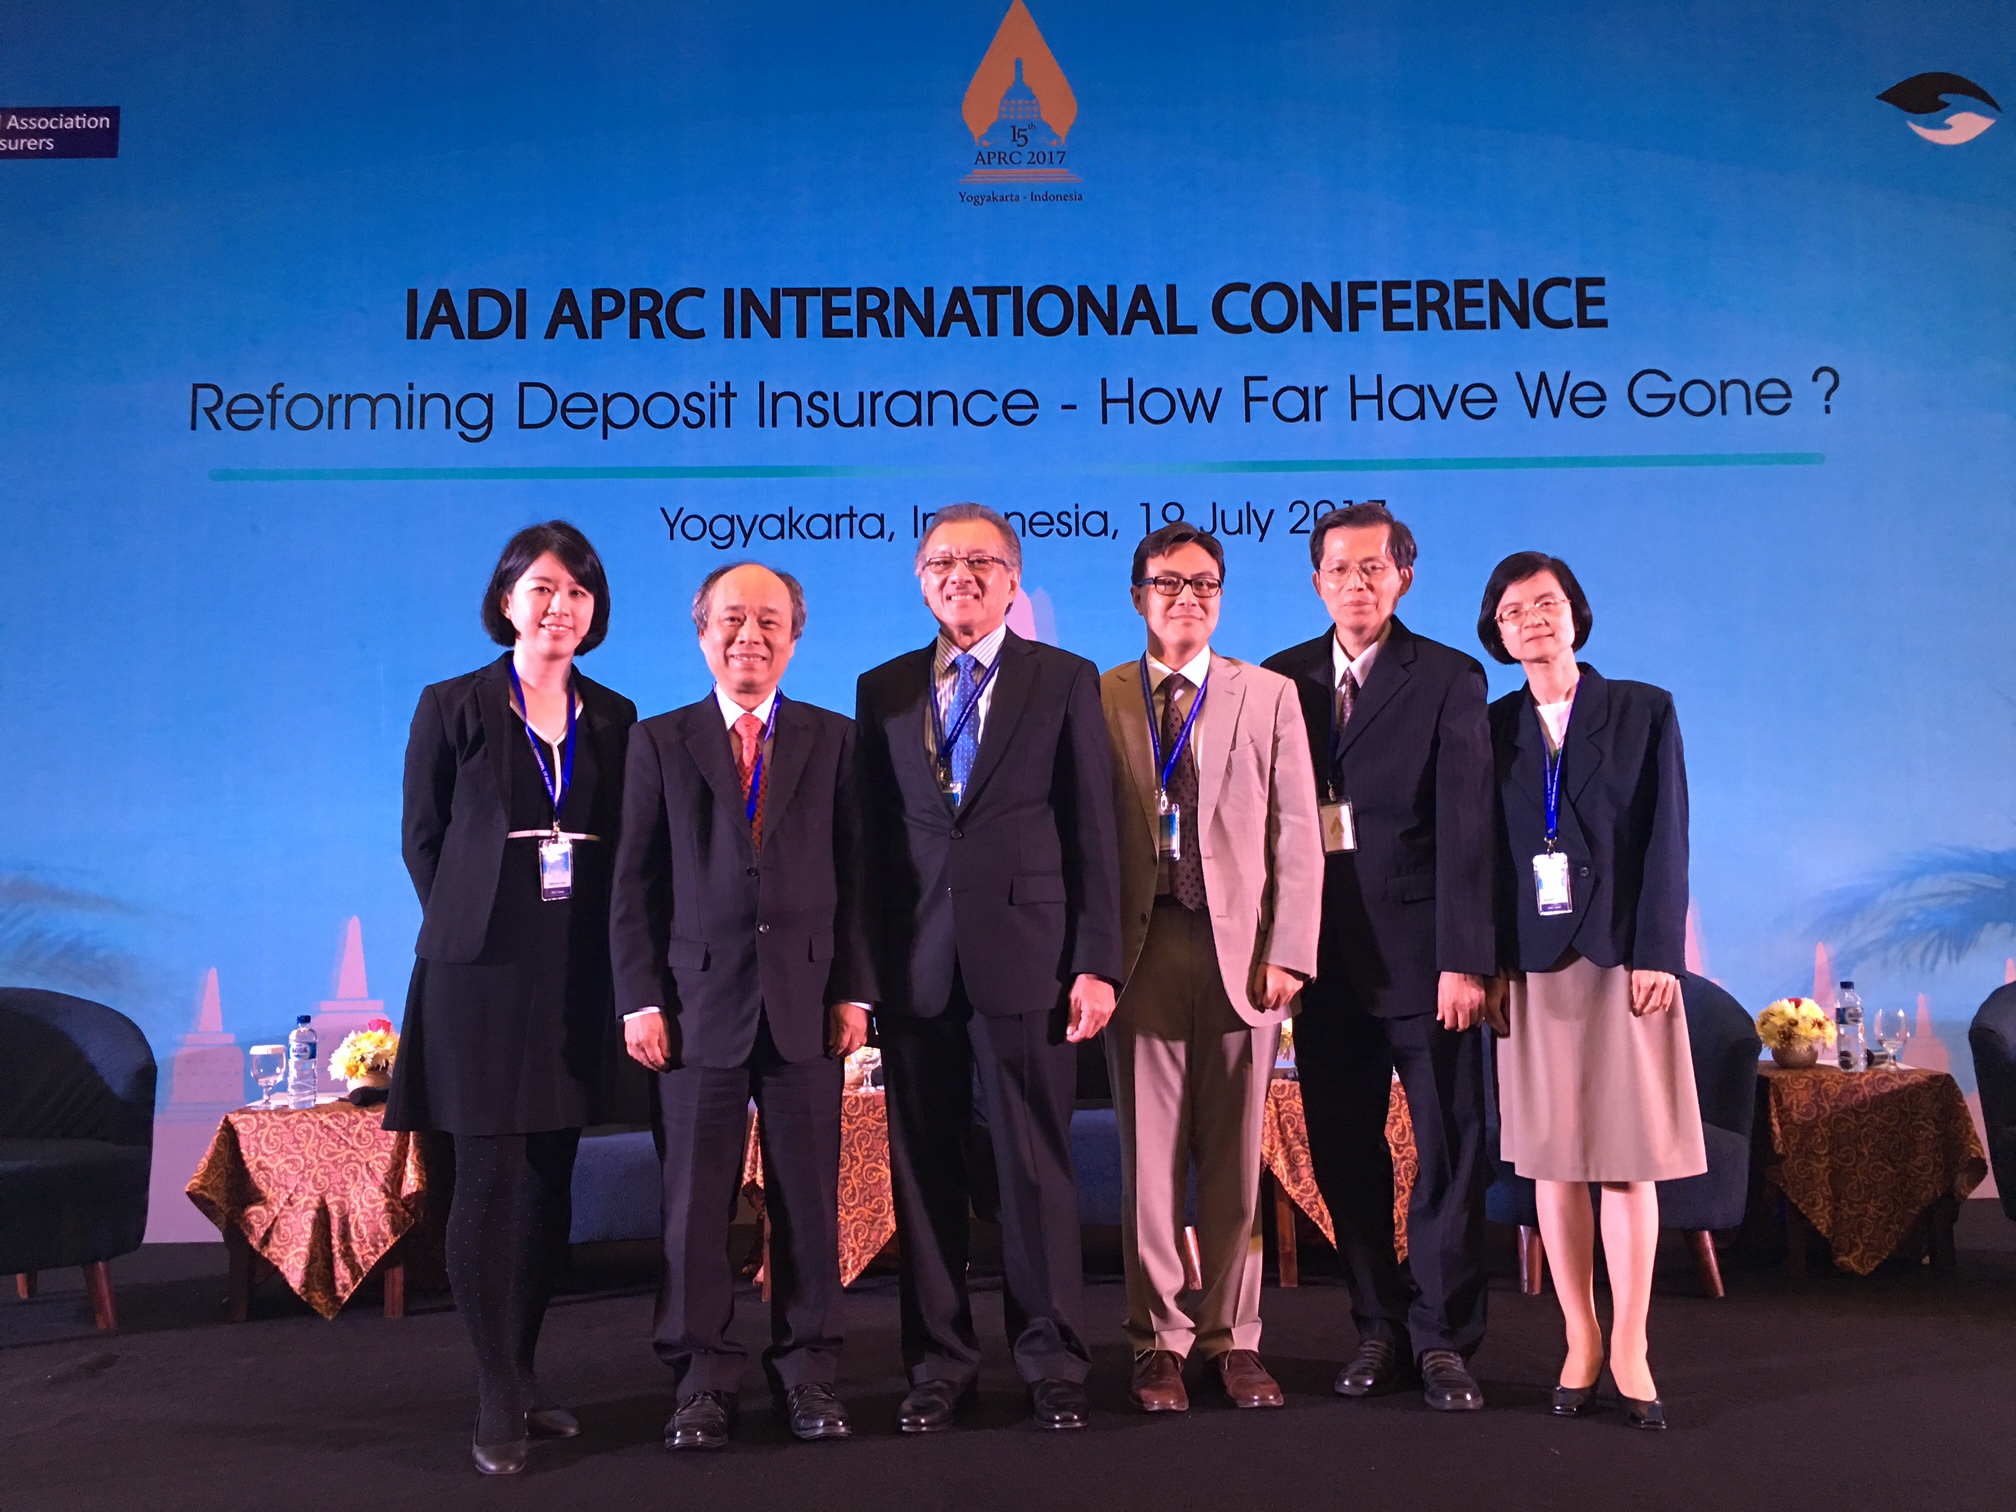 Group Photo of CDIC President Michael Lin (2nd from the left) and EVP William Su (2nd from the right) with the APRC event host organization- IDIC Chairman Halim Alamsyah (3rd from the left) and CEO Fauzi Ichsan (3rd from the right)